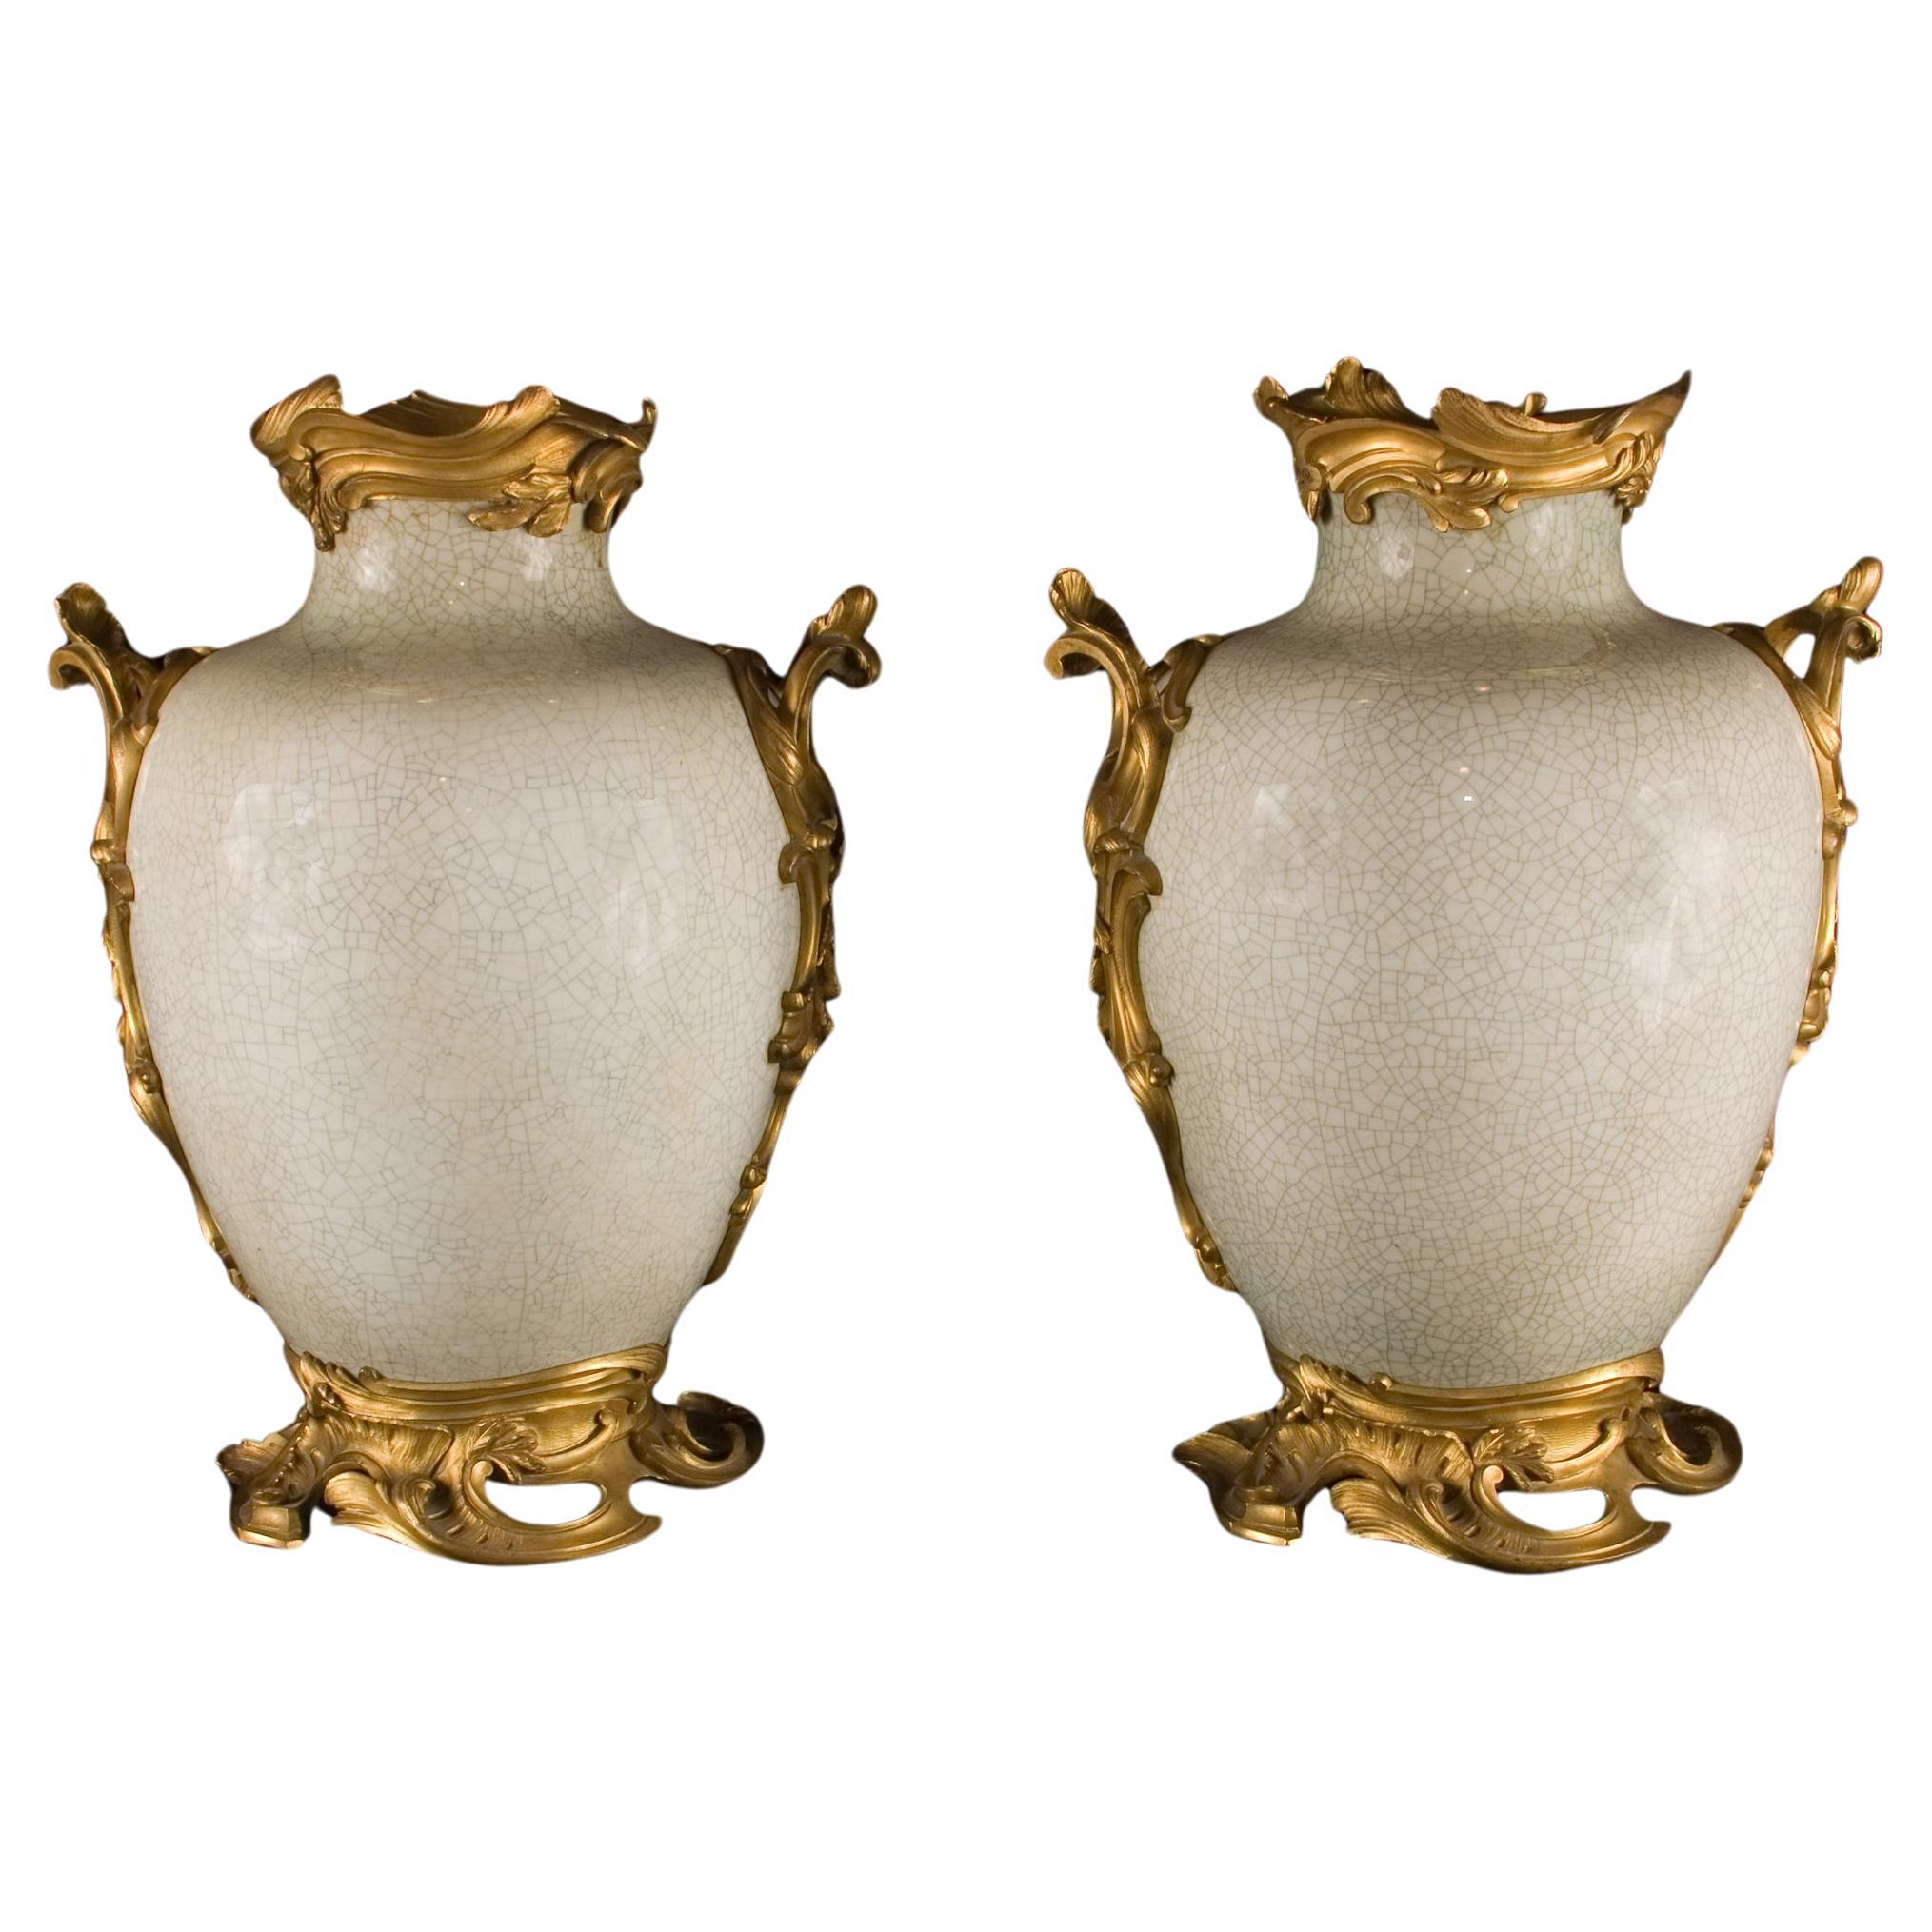 Fine Pair of 18th Century Chinese Craqule Vases with Bronze Mounts